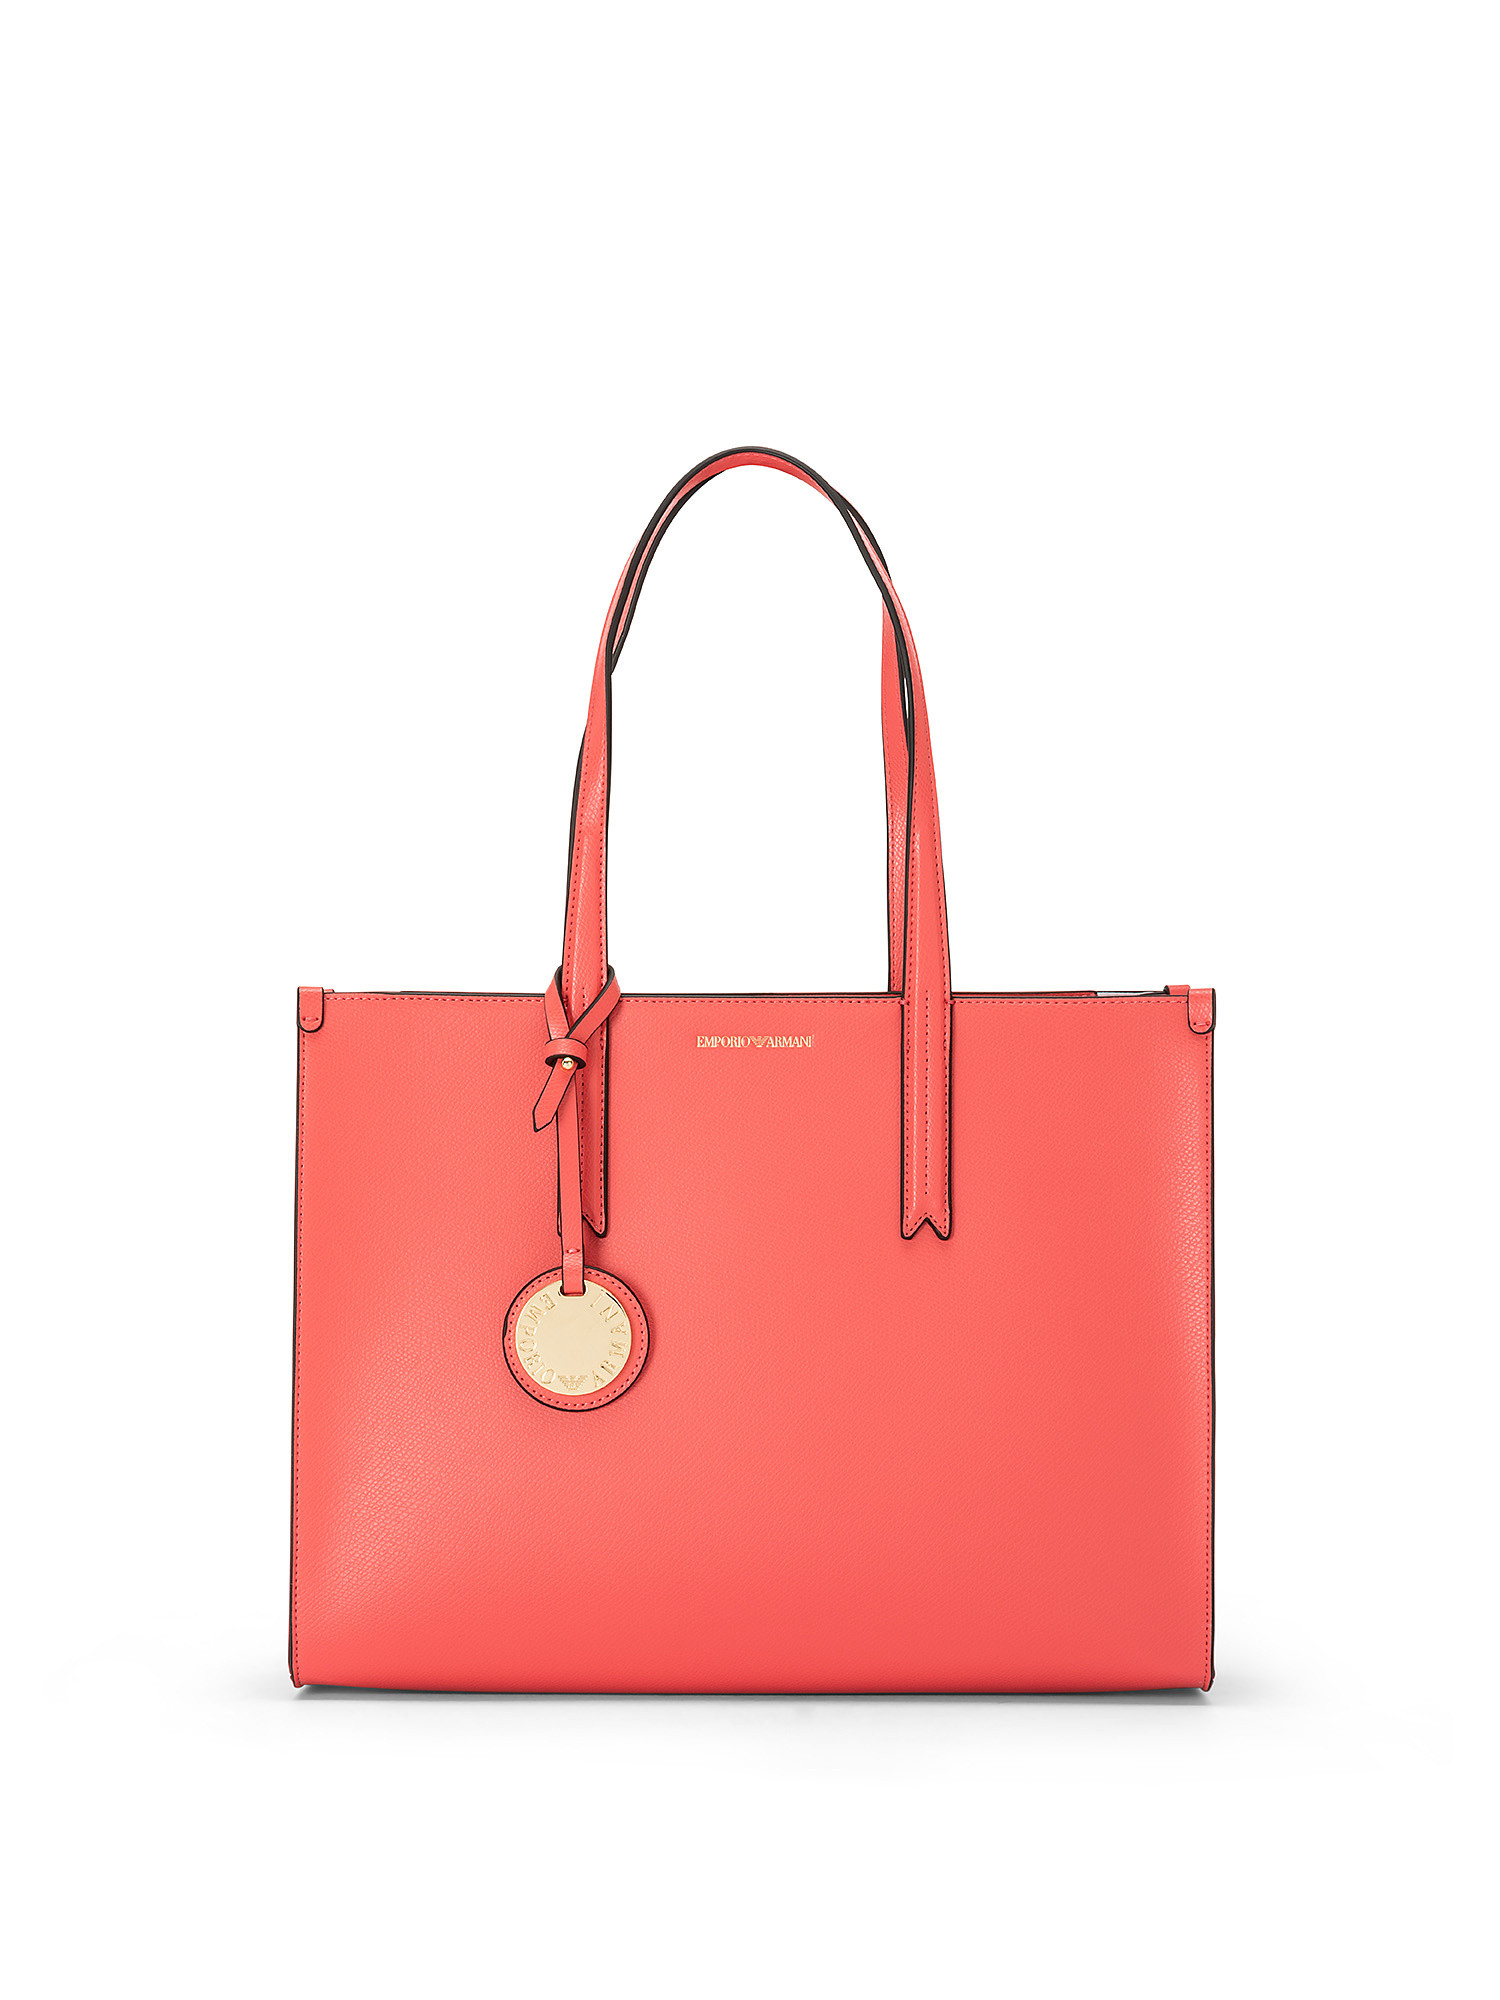 Shopping bag, Rosso corallo, large image number 0